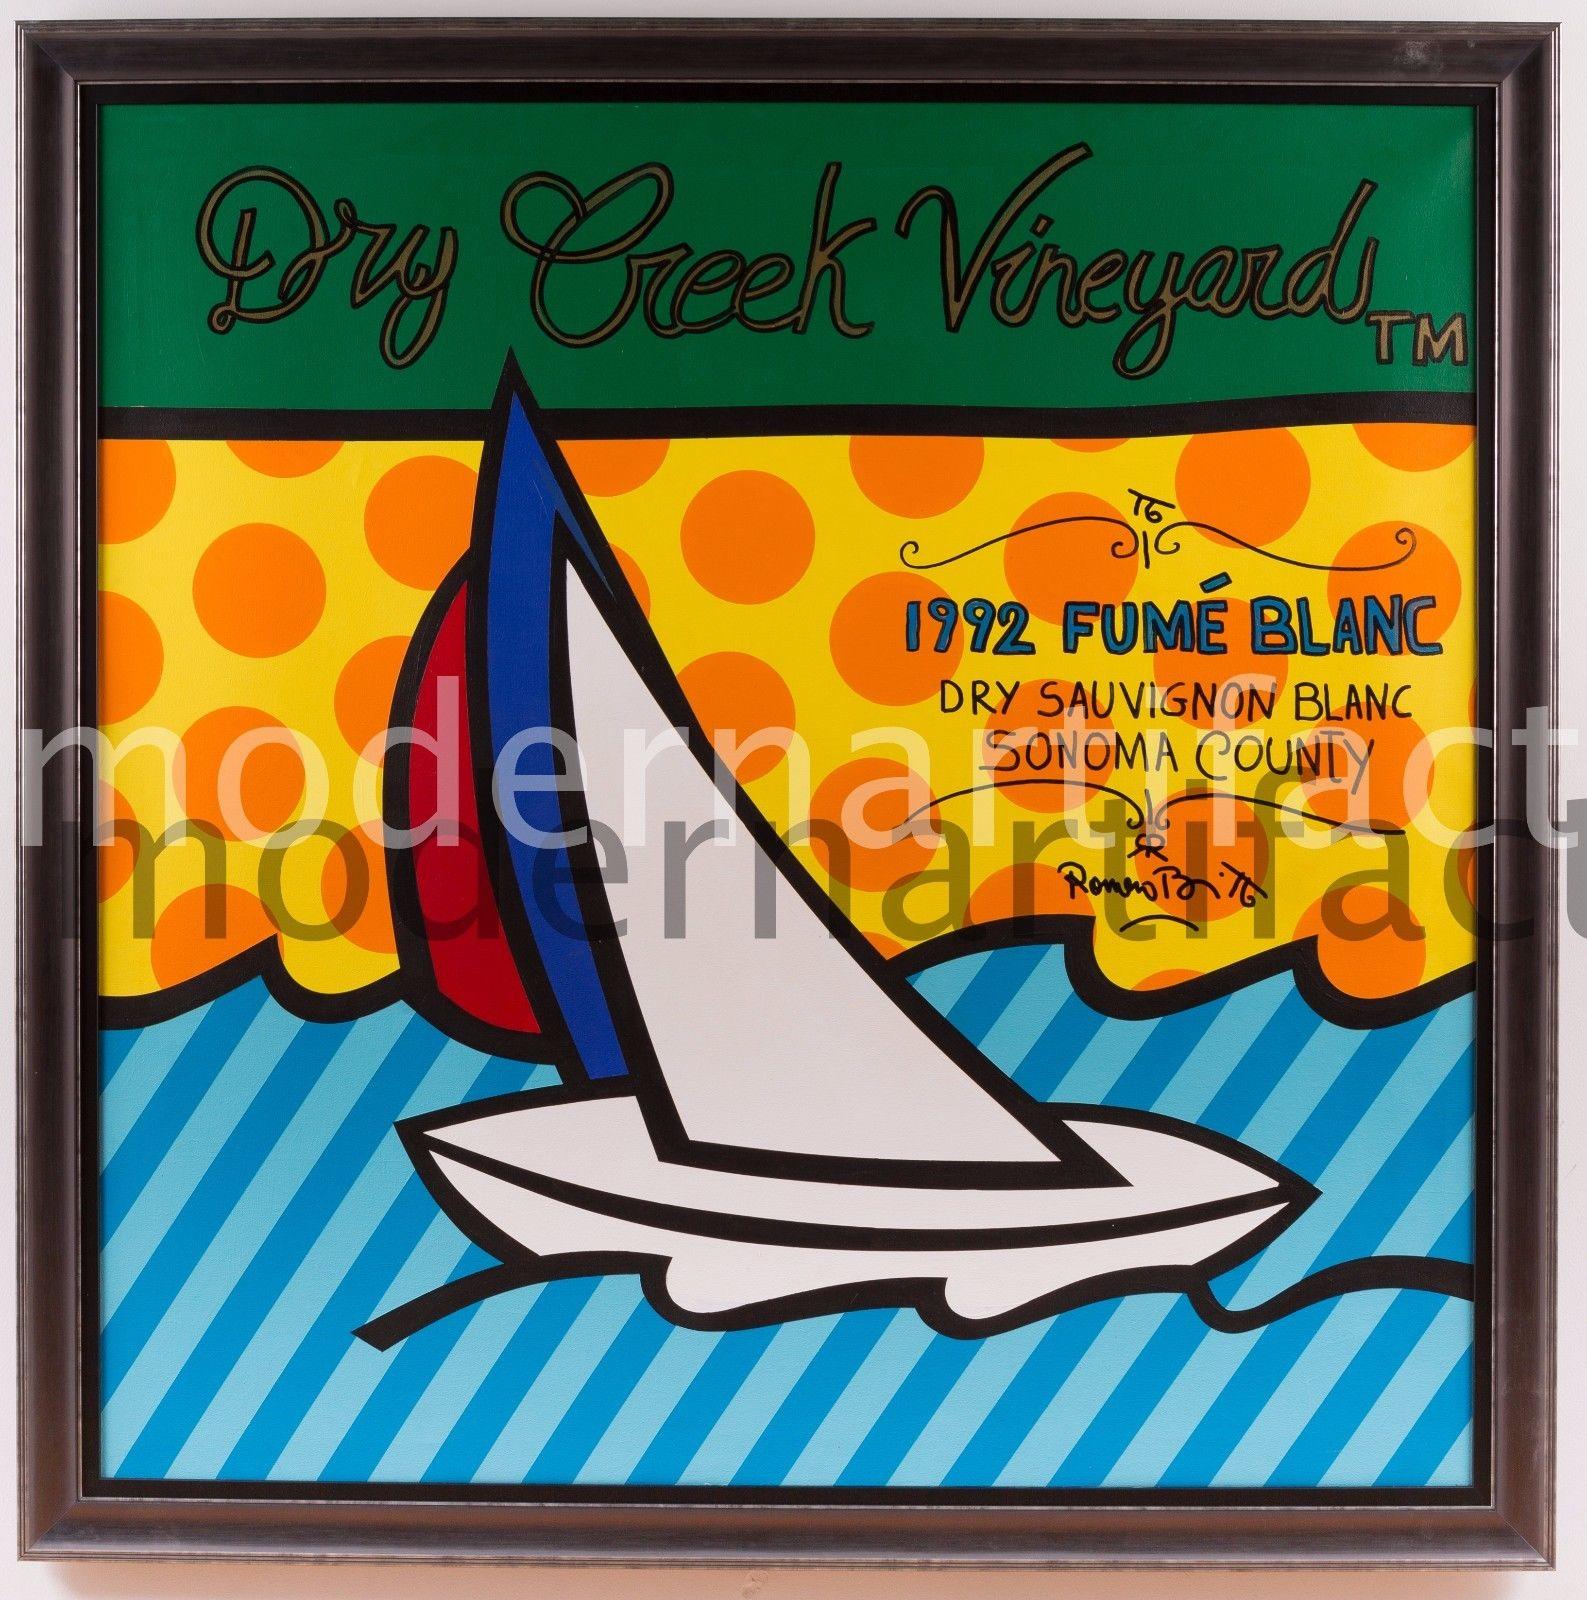 Artist: Romero Britto
Title: 1992 Fume Blanc
Date: 1994
Medium: Acrylic on Canvas
Dimensions: 48" x 48" inches Framed to 54" x 54"
Signature: Signed and inscribed on the back

Romero BRITTO Authentic and Original Painting!! Submit Best Offer: The